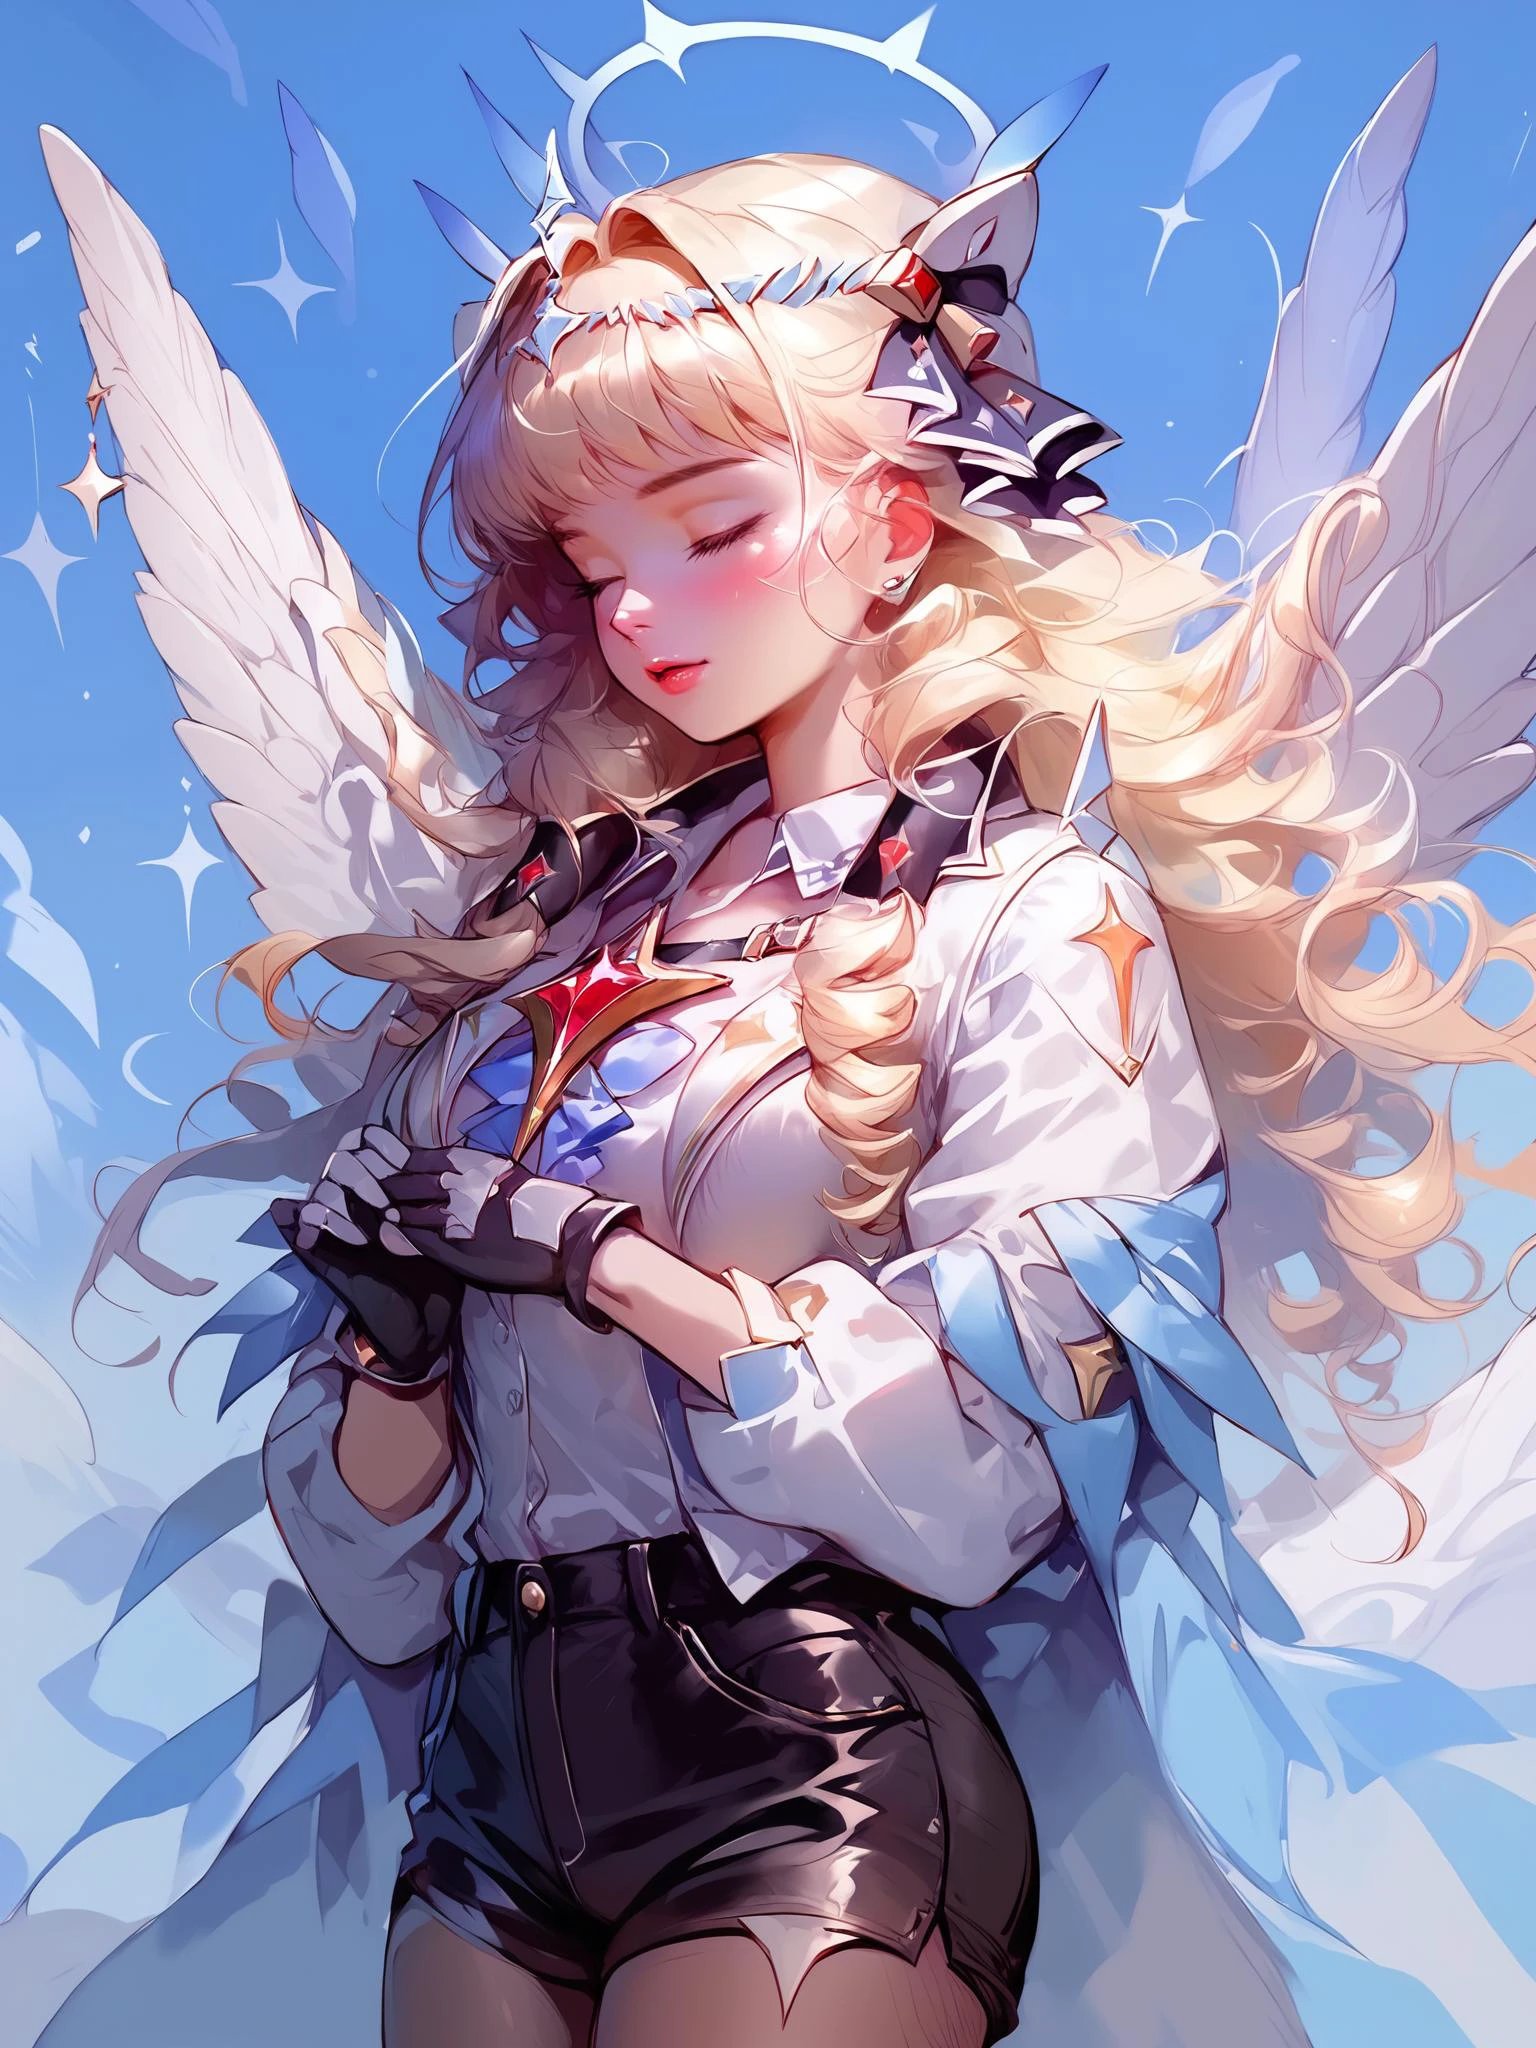 score_9, score_8_up, score_7_up, dreamcore, heaven,  bloom light, skin light, close-up BREAK 1girl, nikkecrwn, blonde hair, long hair, drill hair, tiara, hair ornament, headgear, blue eyes, white jacket, white shirt, brooch, center frills, black shorts, high-waist shorts, gloves, wings, armored boots, fishnet pantyhose,wide hips, thick thigh, holding spear of heaven w1ngs, angel wings ,halo
3th3r34l
